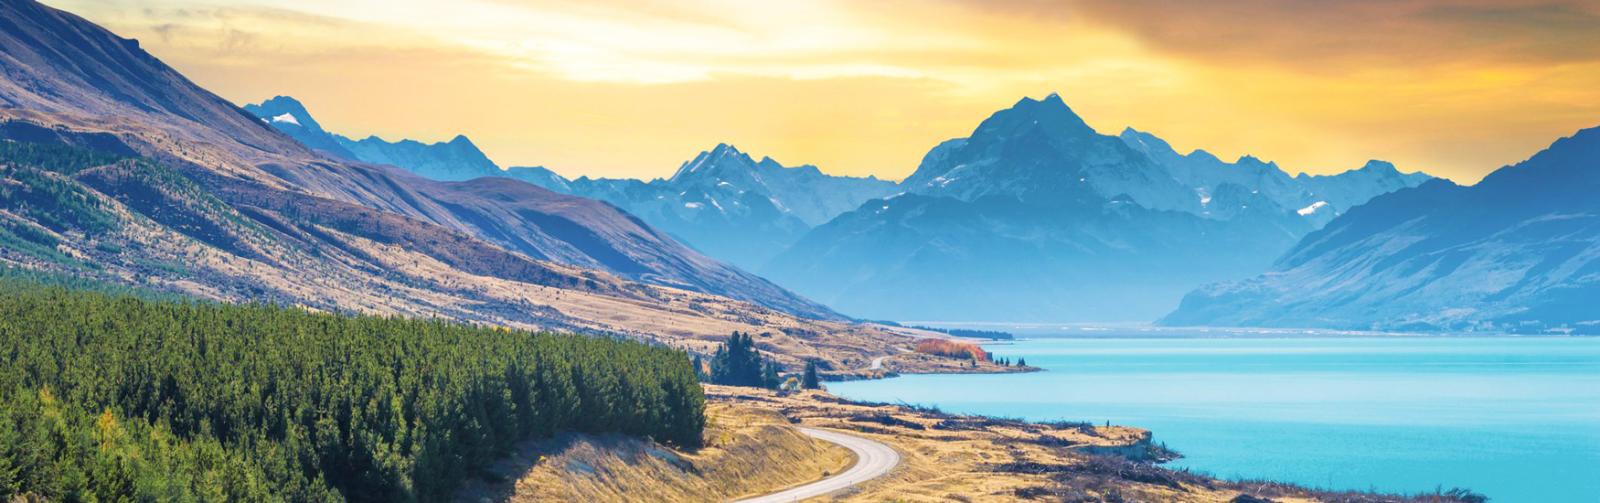 10 Day Highlights of the South Island Self Drive Tour Itinerary